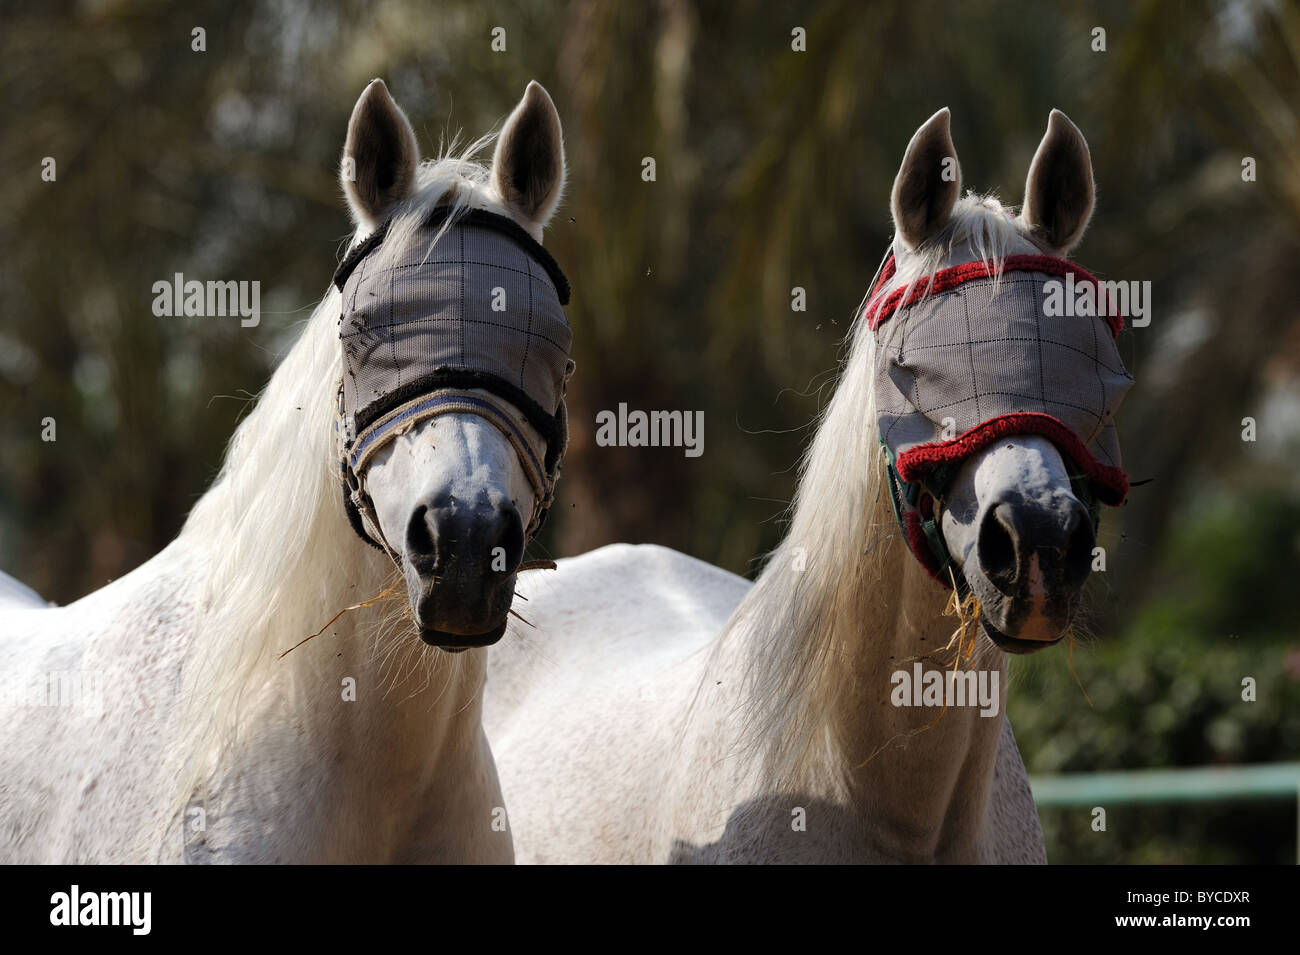 Two domestic horses (Equus ferus caballus) wearing fly masks on a meadow. Stock Photo